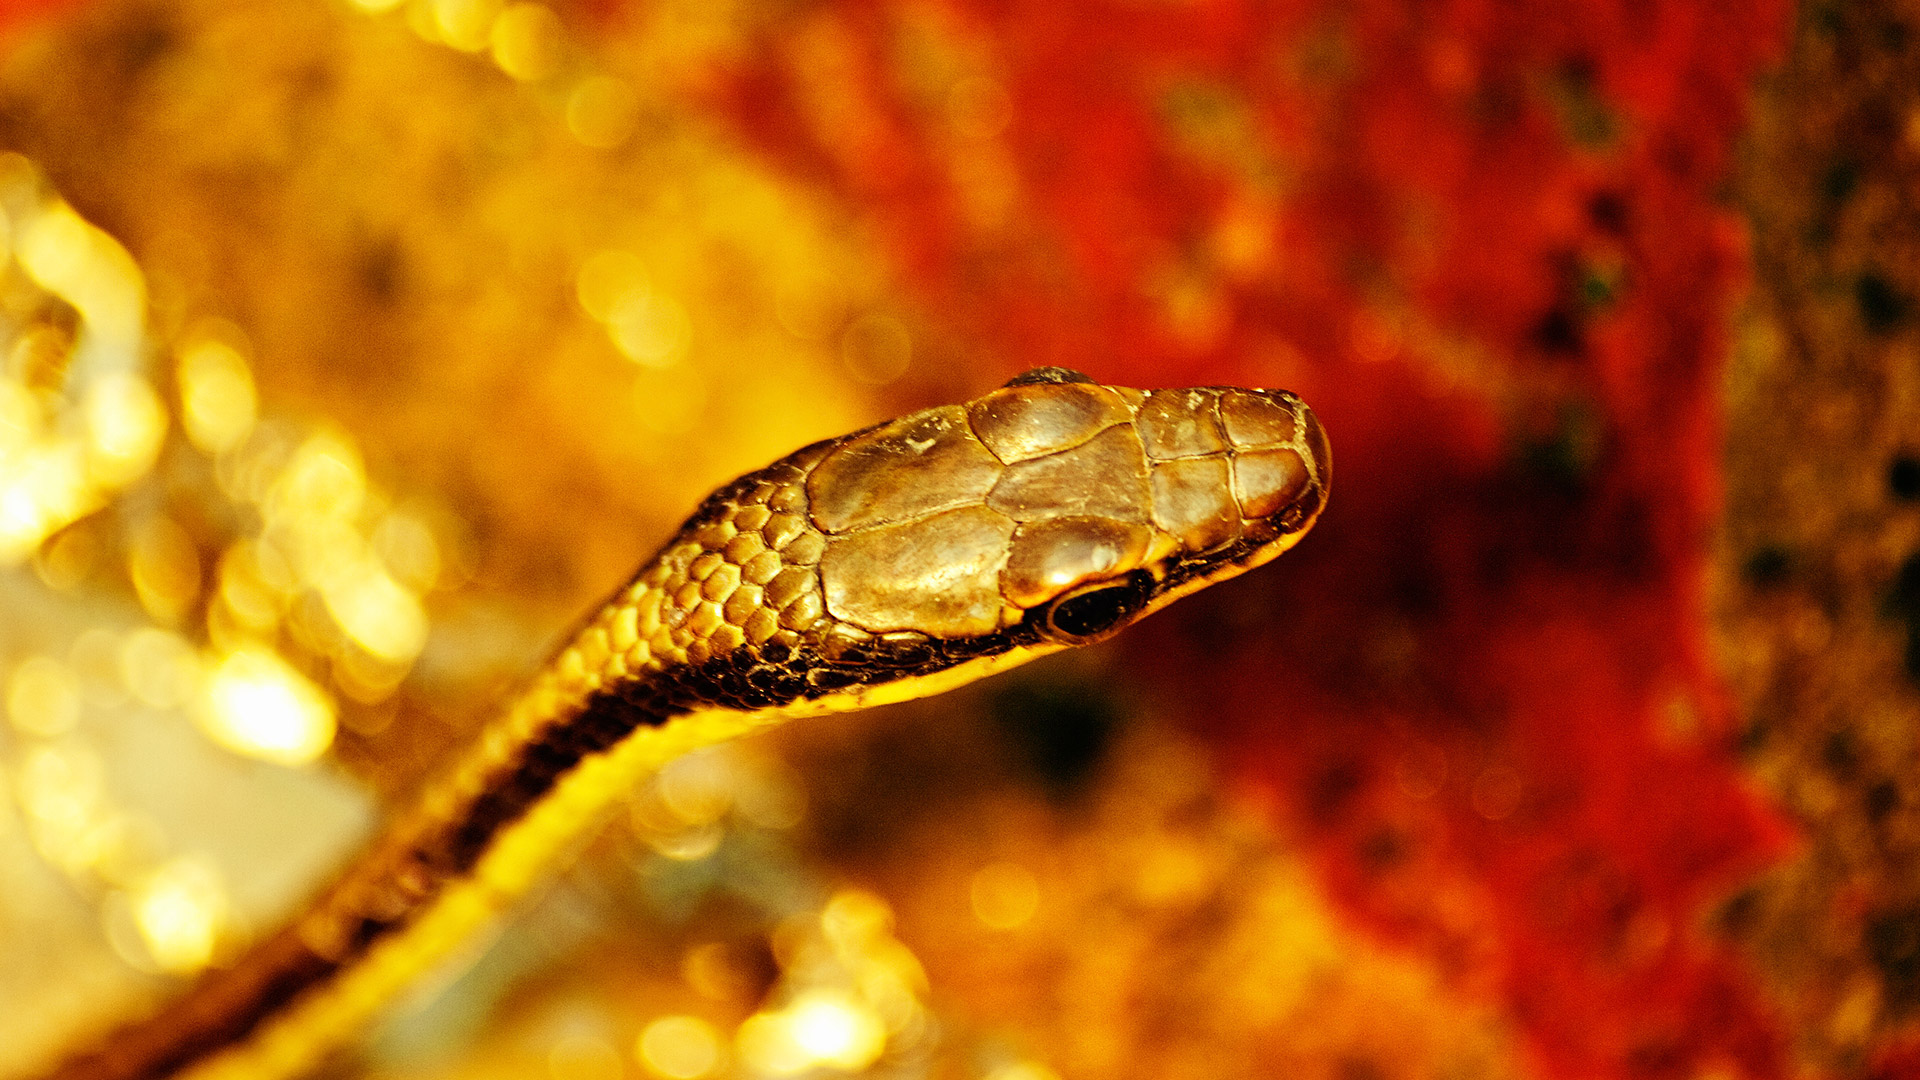 Snakes of Bali